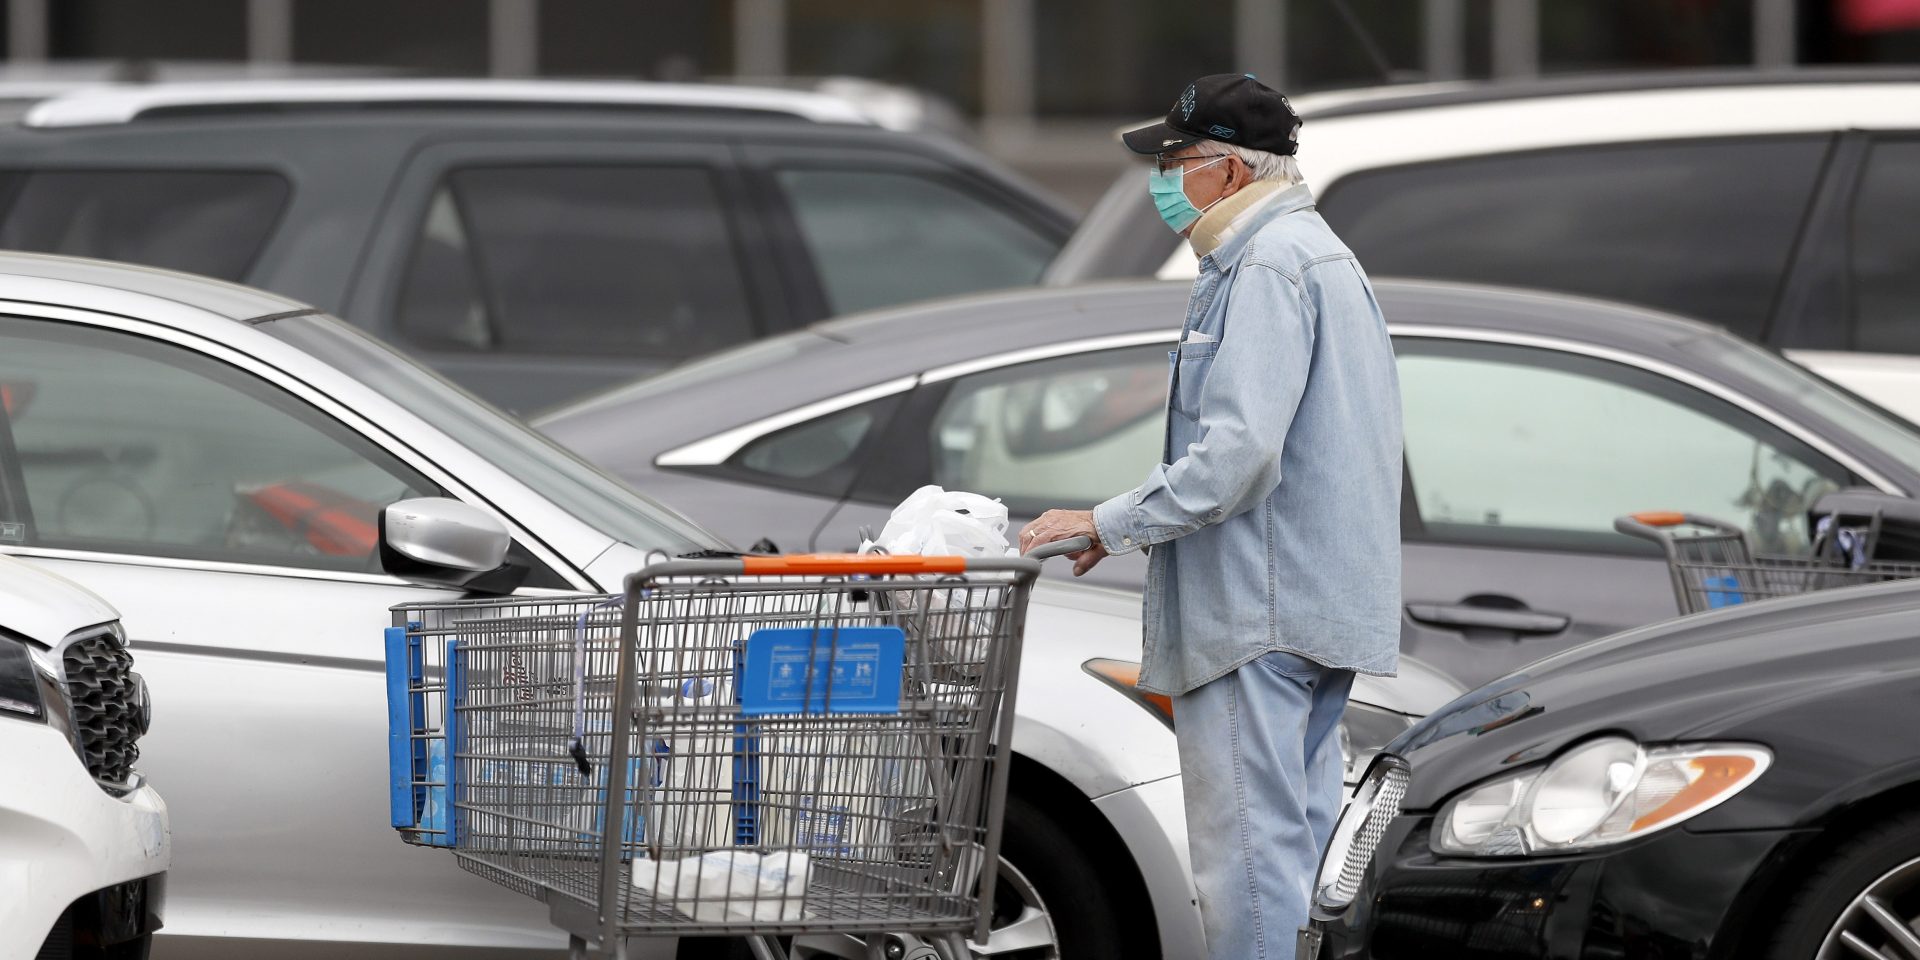 A man wears a face mask as he maneuvers his shopping cart between vehicles after shopping at a Walmart store, Tuesday, March 31, 2020, in Pearl, Miss. 